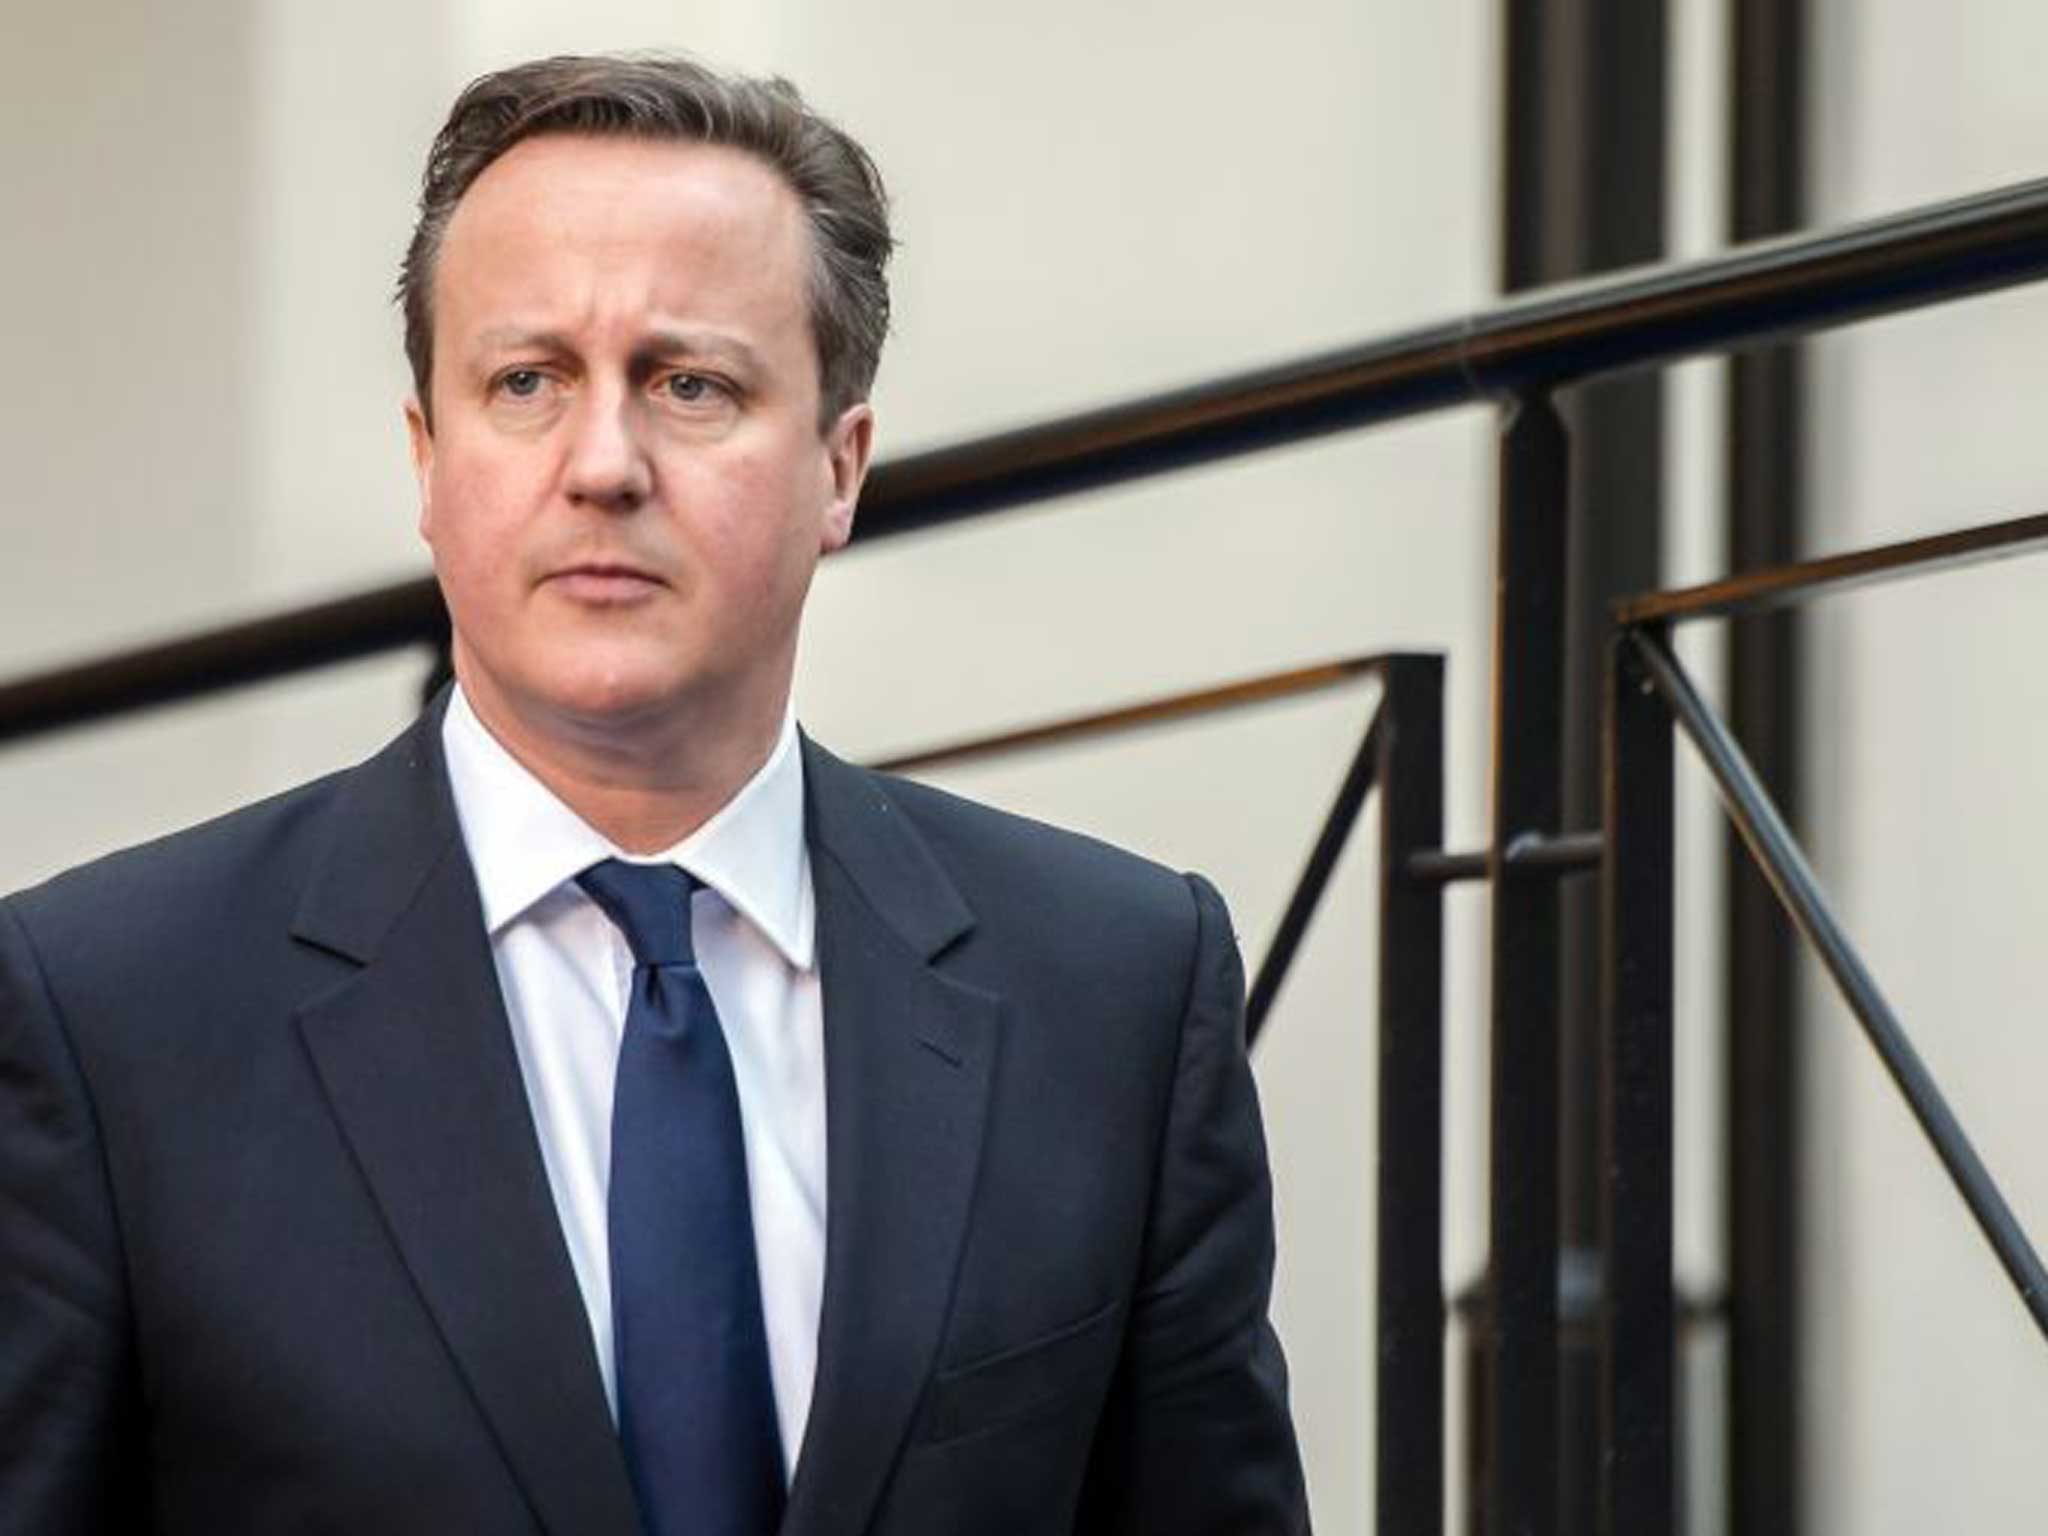 Many backbench Conservative MPs want Cameron to stop the party's 'obsession' with UKIP